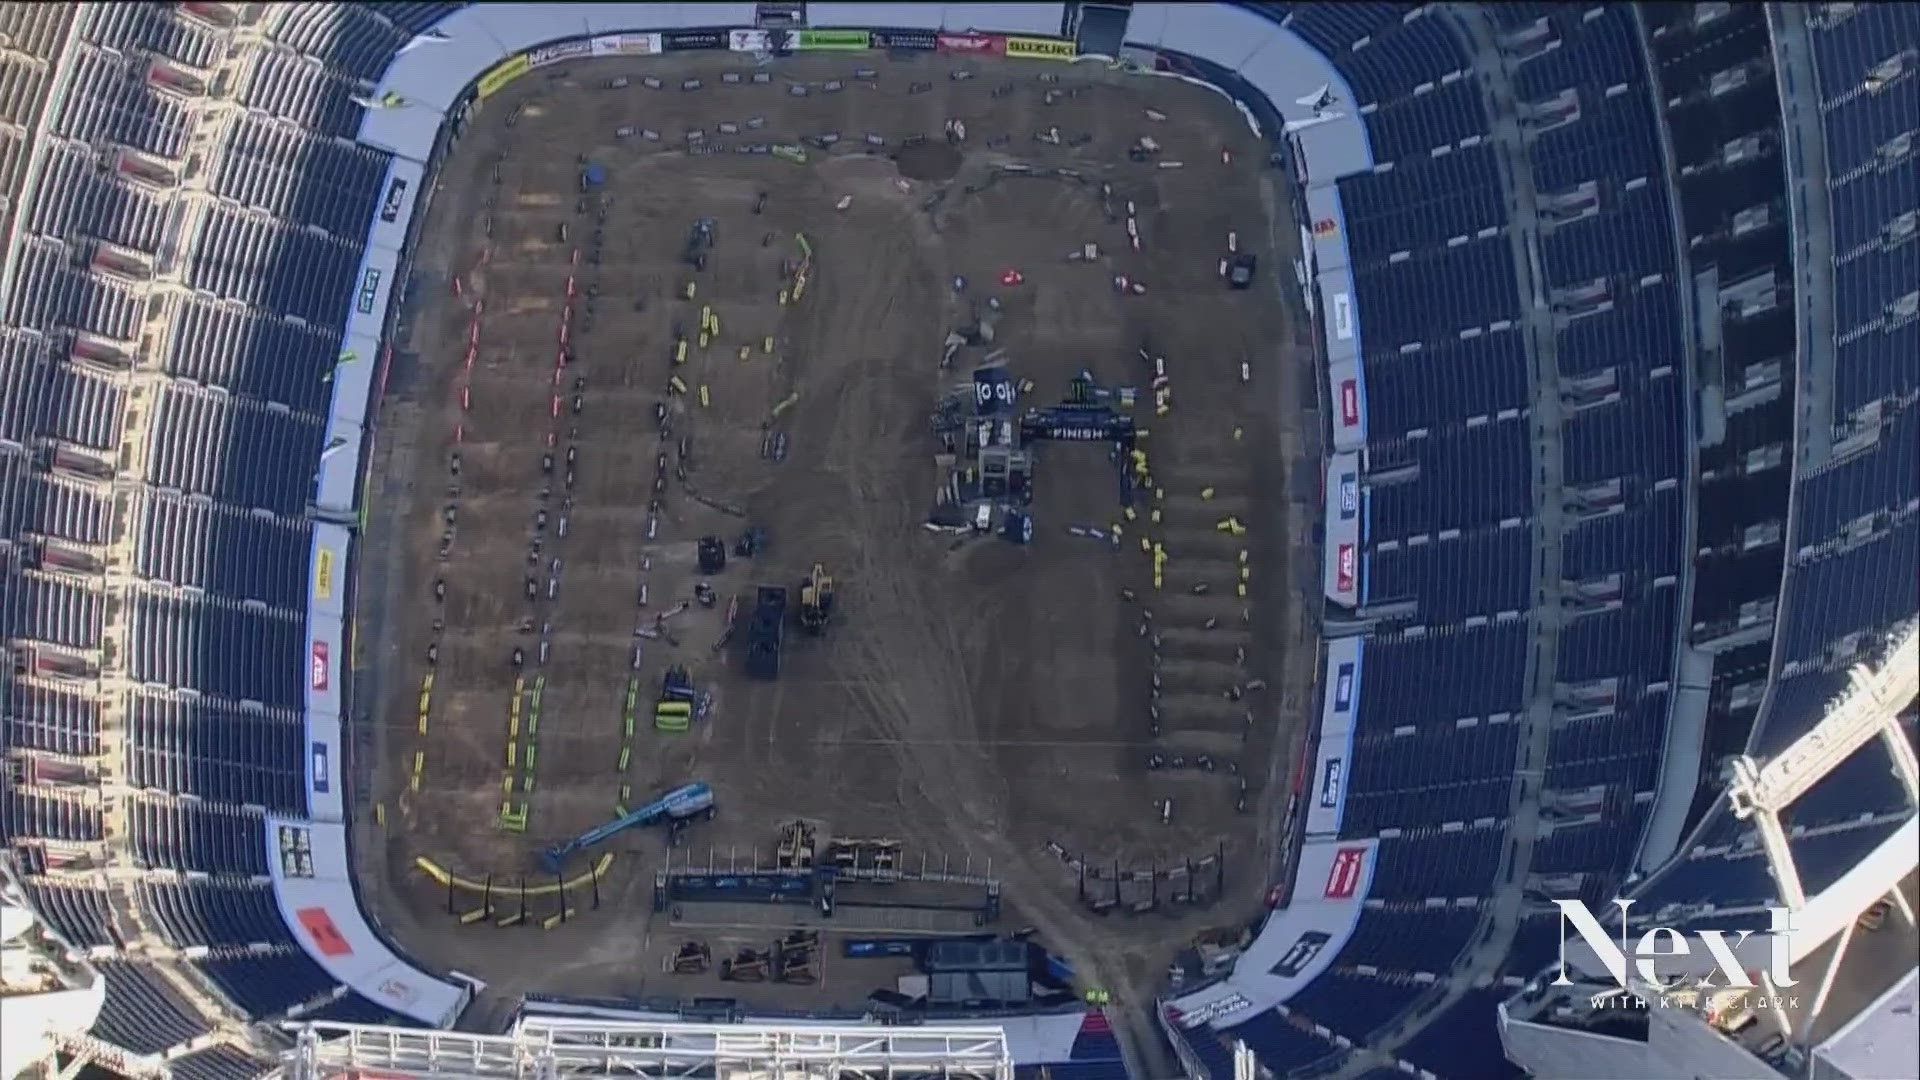 The floor of the Denver Broncos' stadium was covered in dirt for Supercross and Monster Jam.